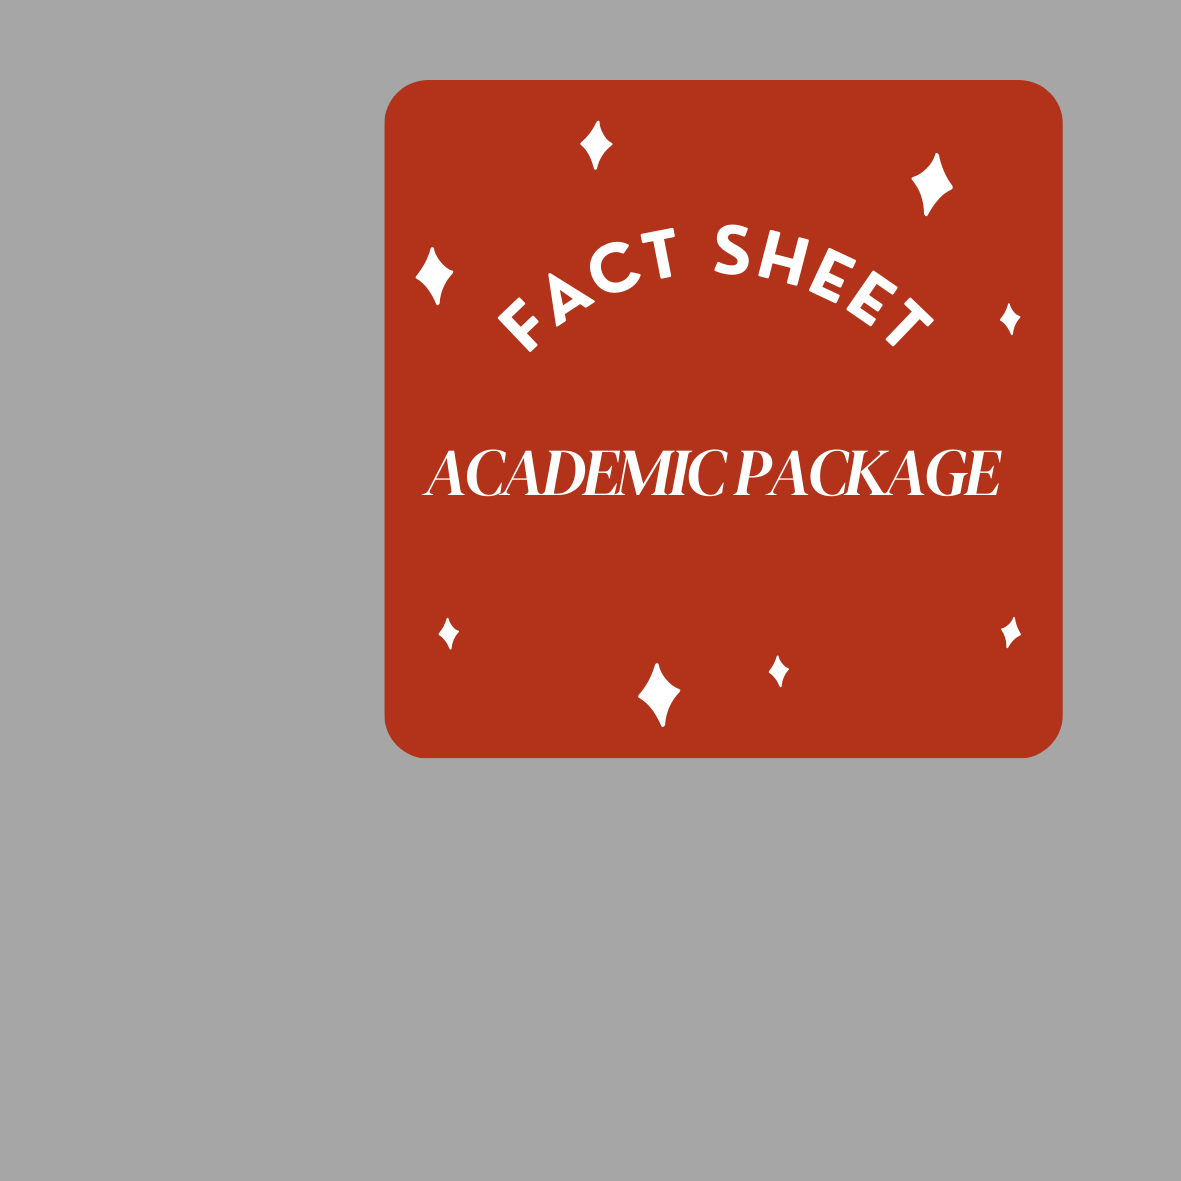 FACT SHEET/ACADEMIC PACKAGE 